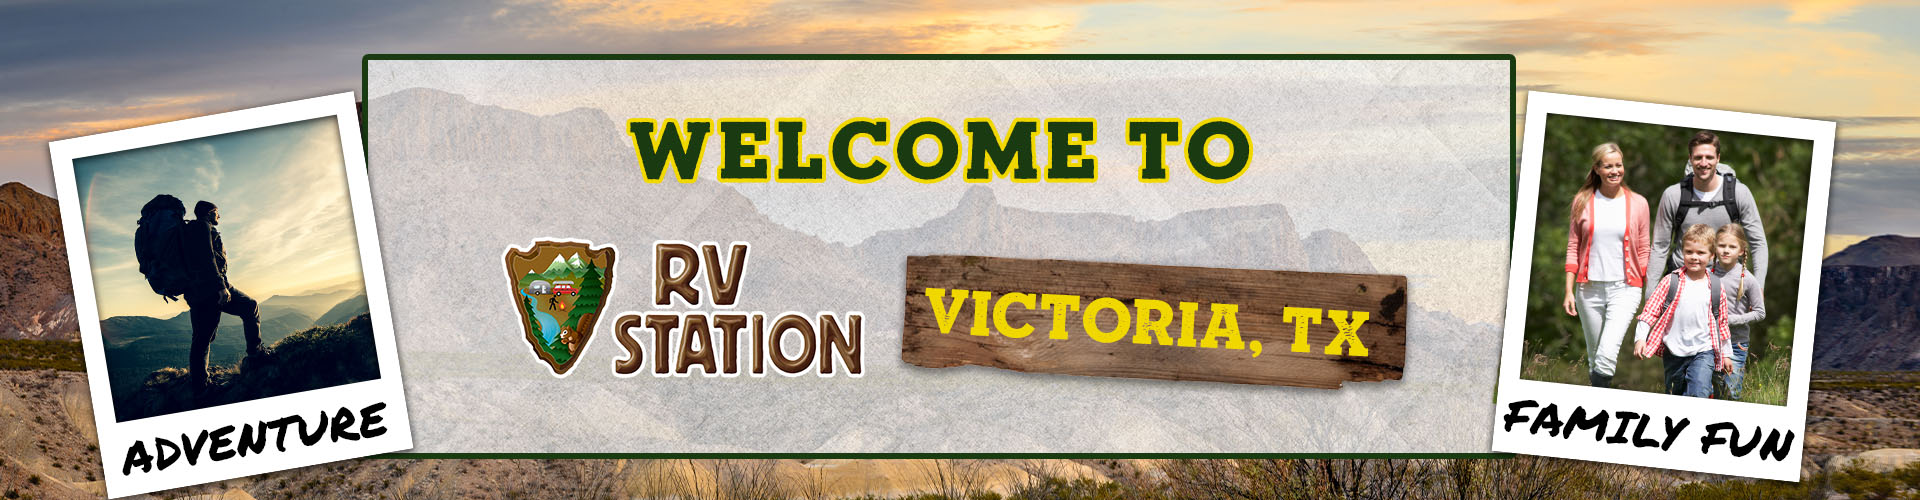 Welcome to RV Station - Victoria Inez, TX